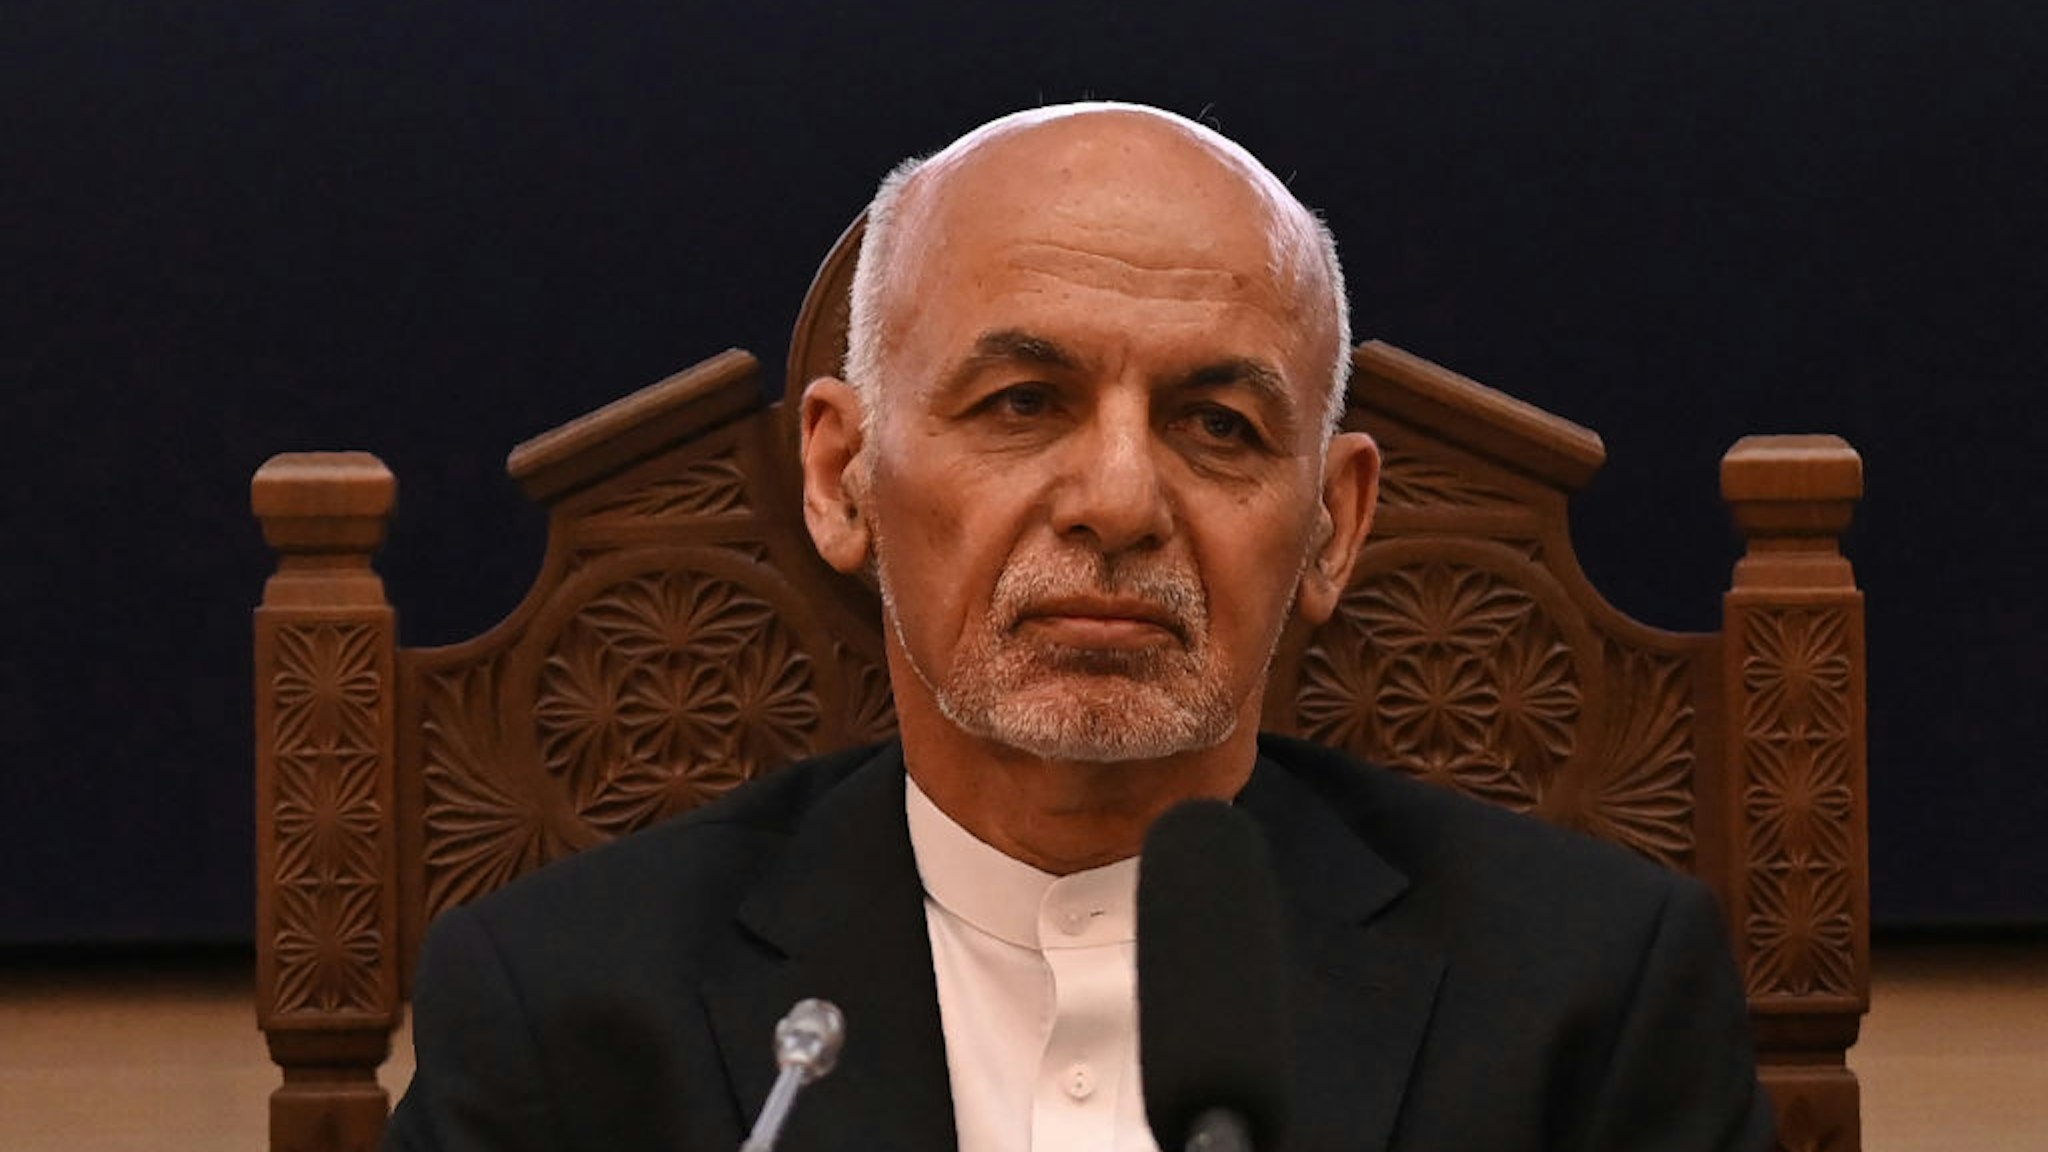 Afghanistan's President Ashraf Ghani looks on while attending a Joint Coordination and Monitoring Board meeting (JCMB) at the Afghan presidential palace in Kabul on July 28, 2021. (Photo by SAJJAD HUSSAIN / AFP) (Photo by SAJJAD HUSSAIN/AFP via Getty Images)